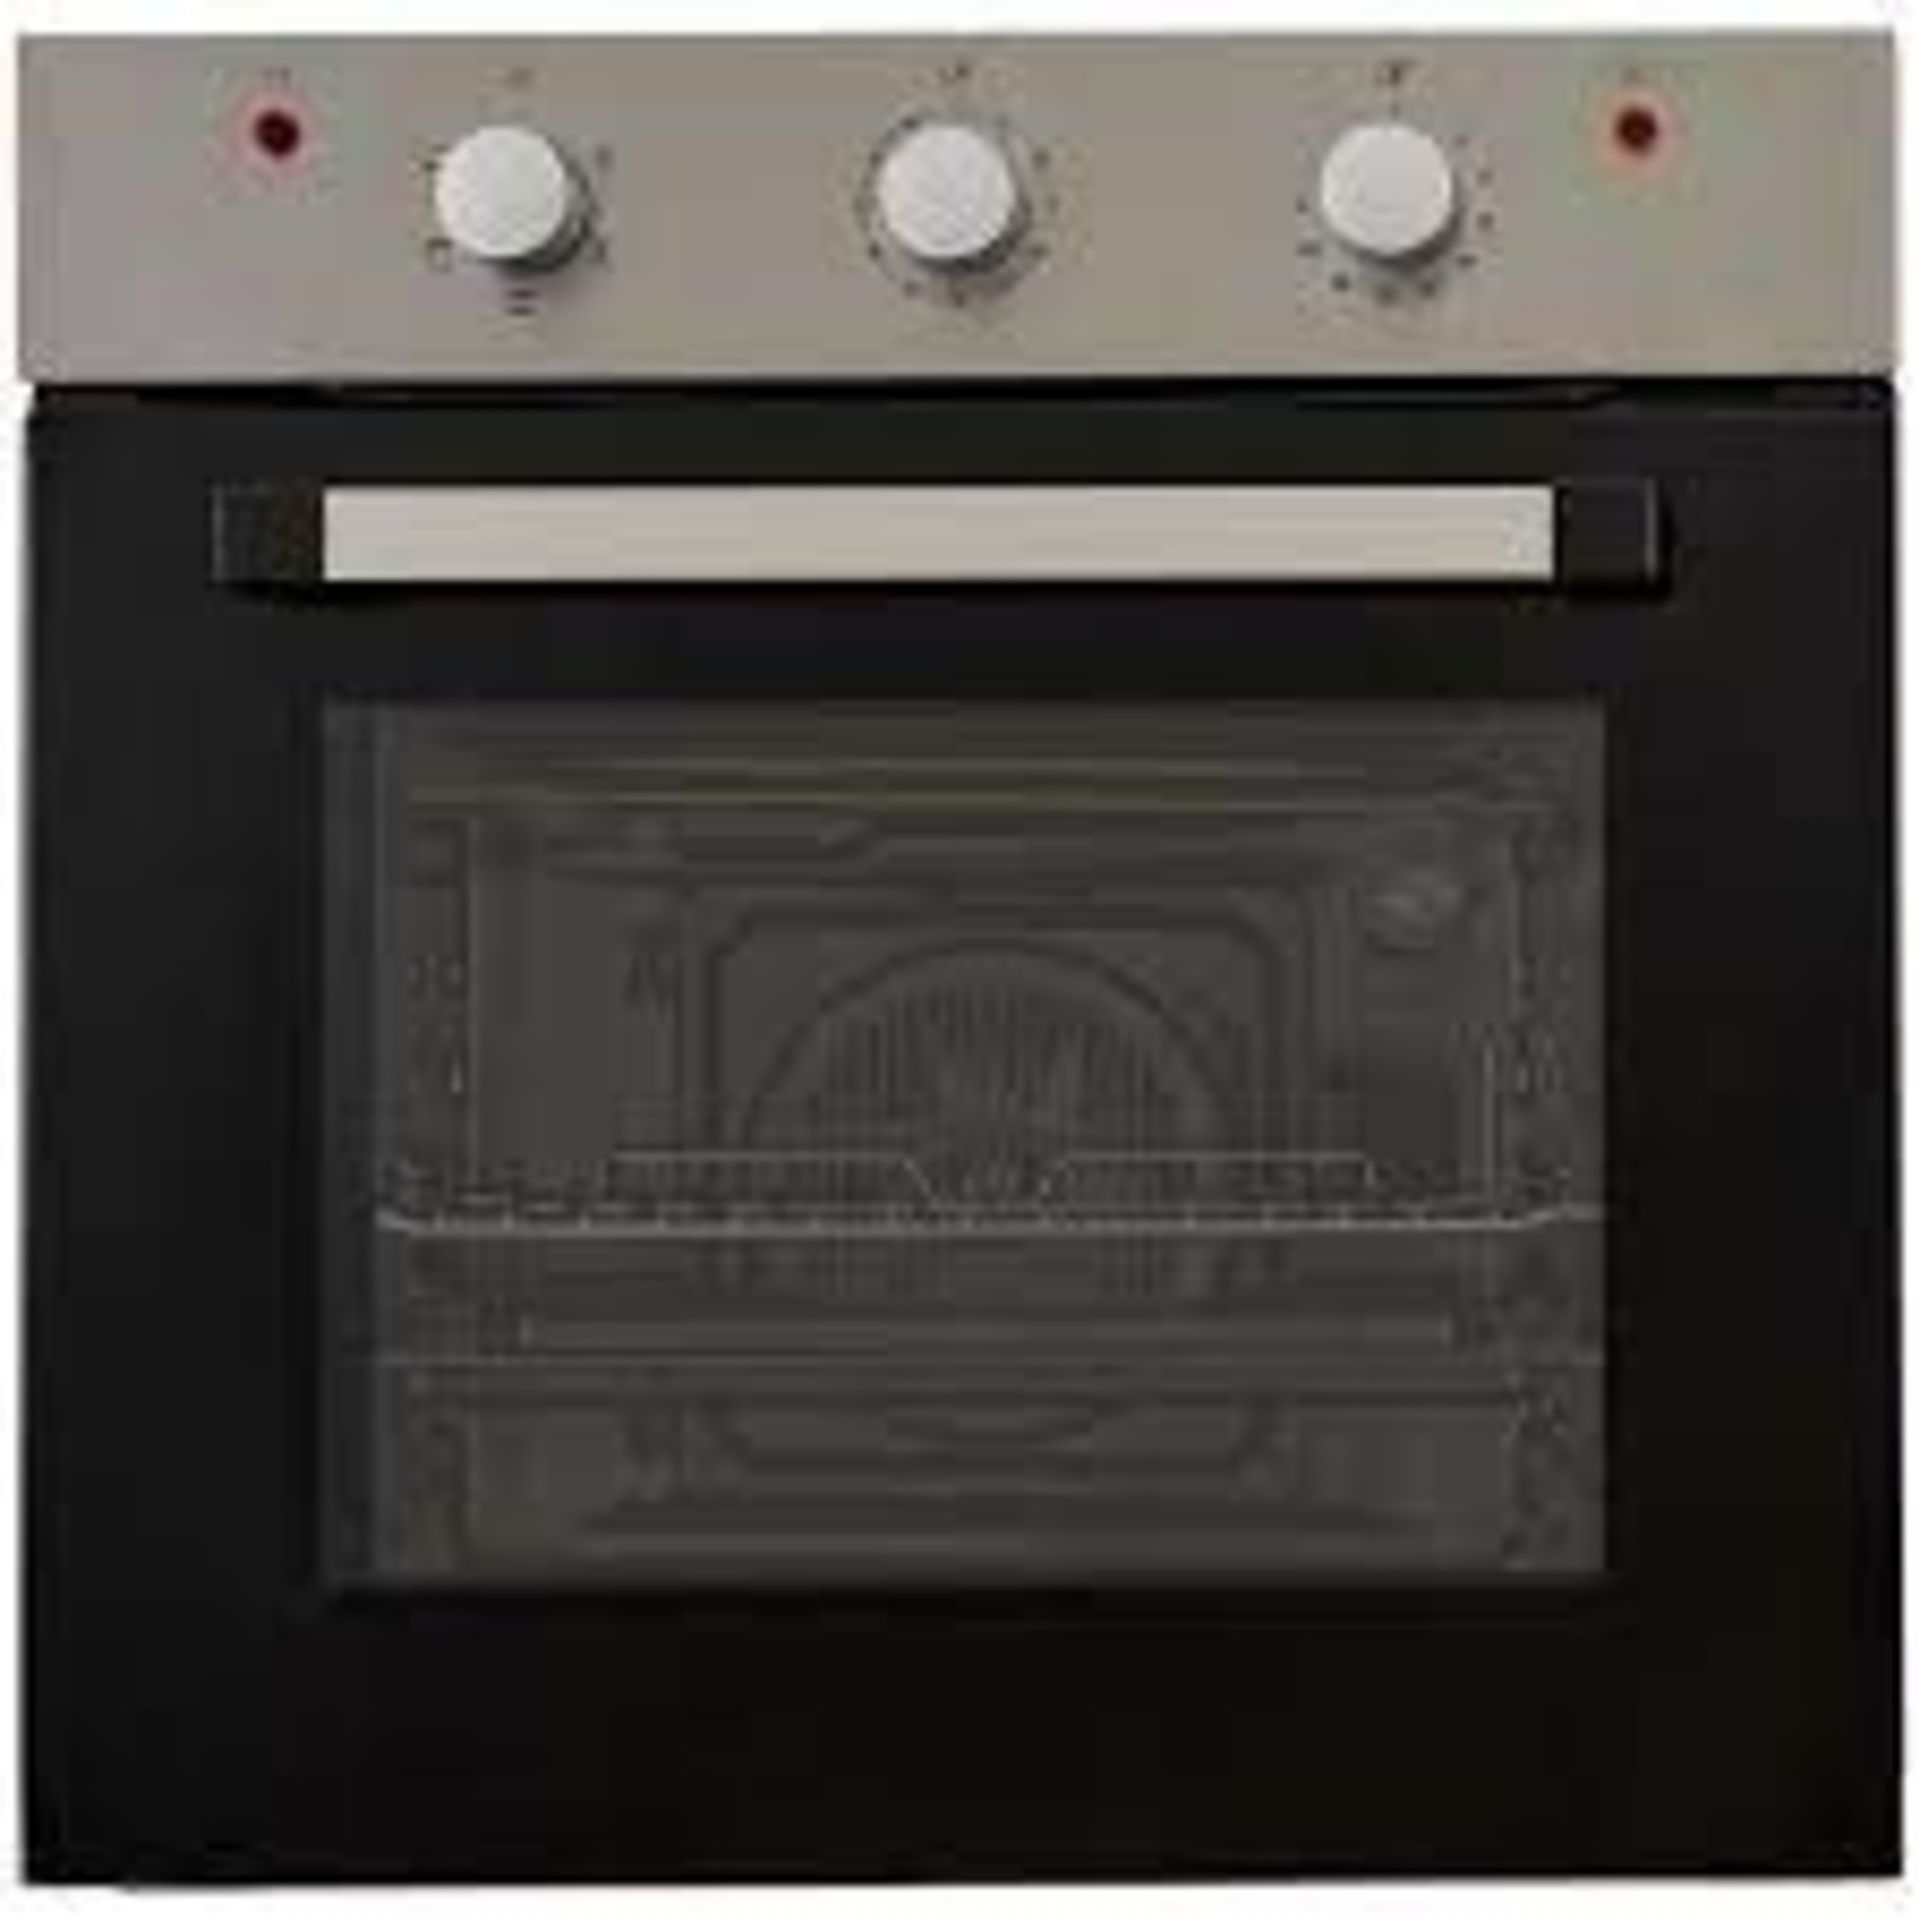 Cooke & Lewis CLFSB60 Built-in Single Fan Oven - Black. - R46. Enjoy cooking again with this black